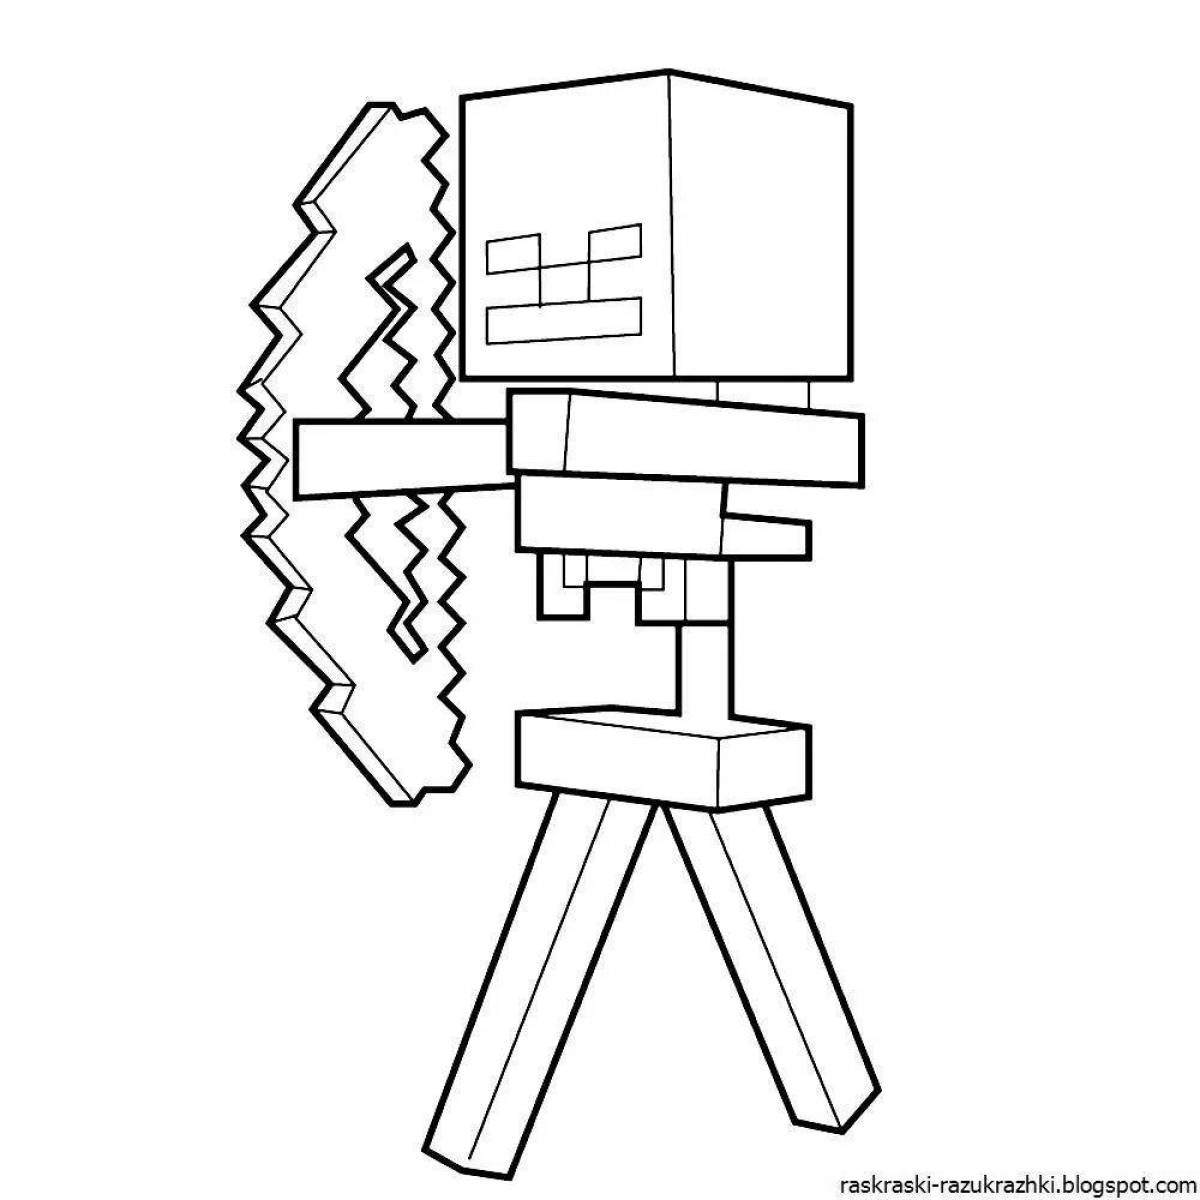 Exquisite siren head minecraft coloring page